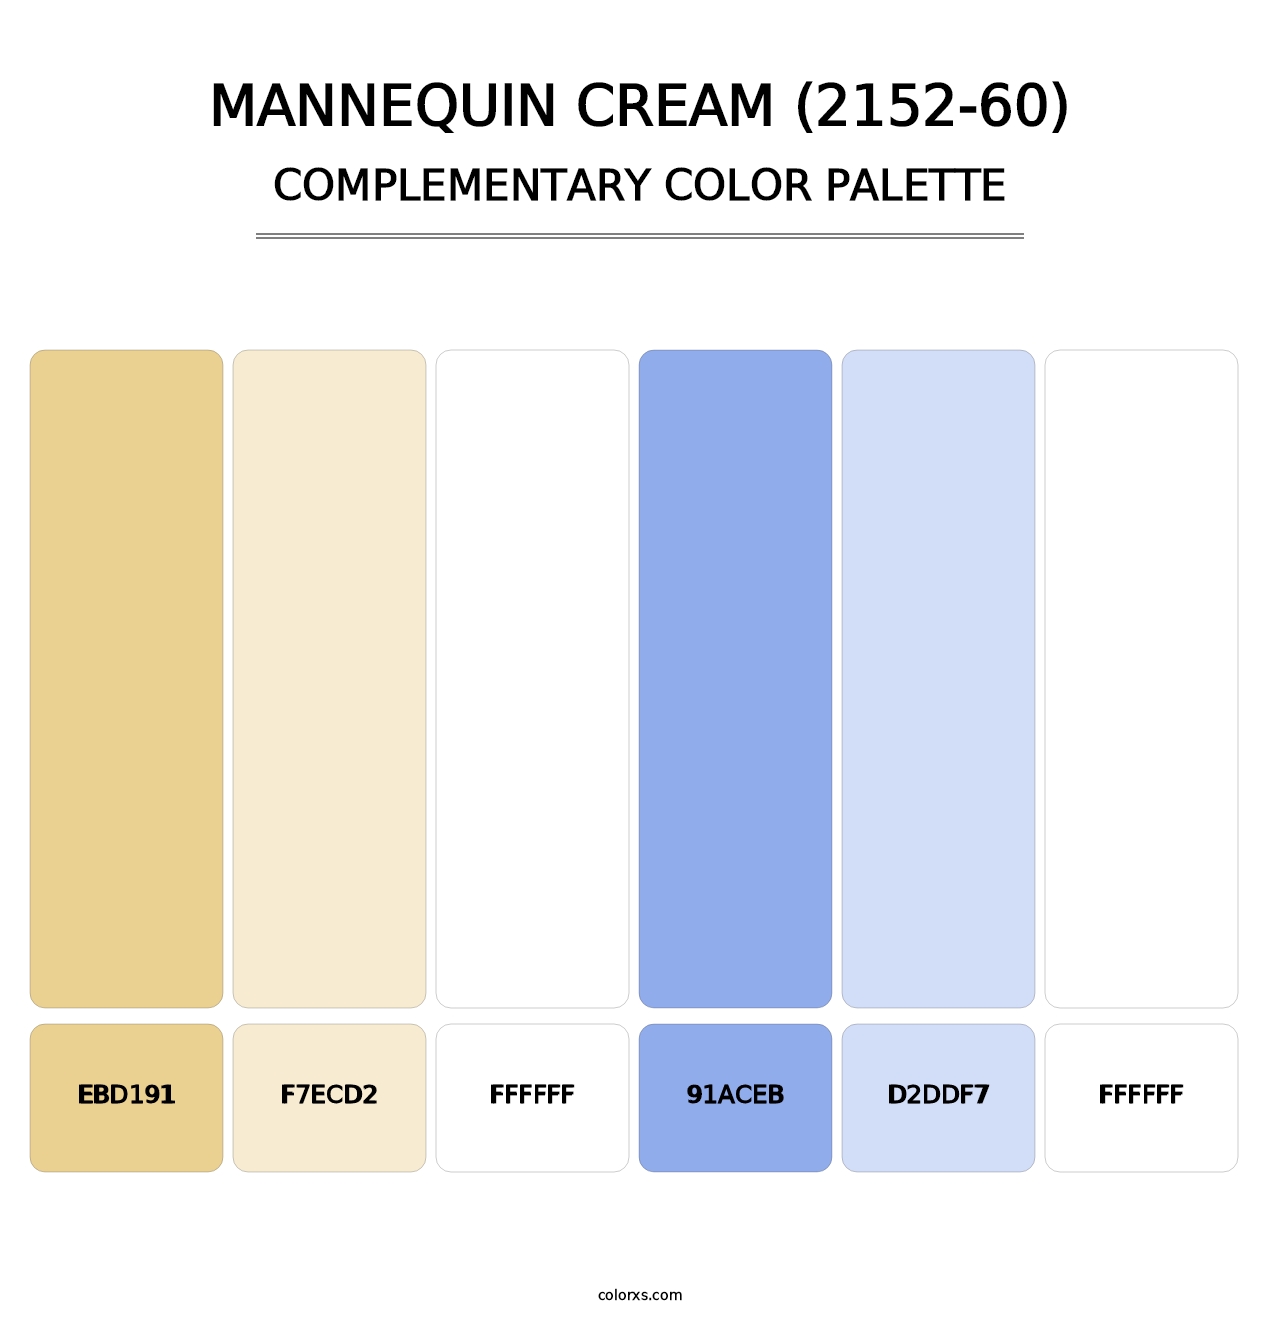 Mannequin Cream (2152-60) - Complementary Color Palette